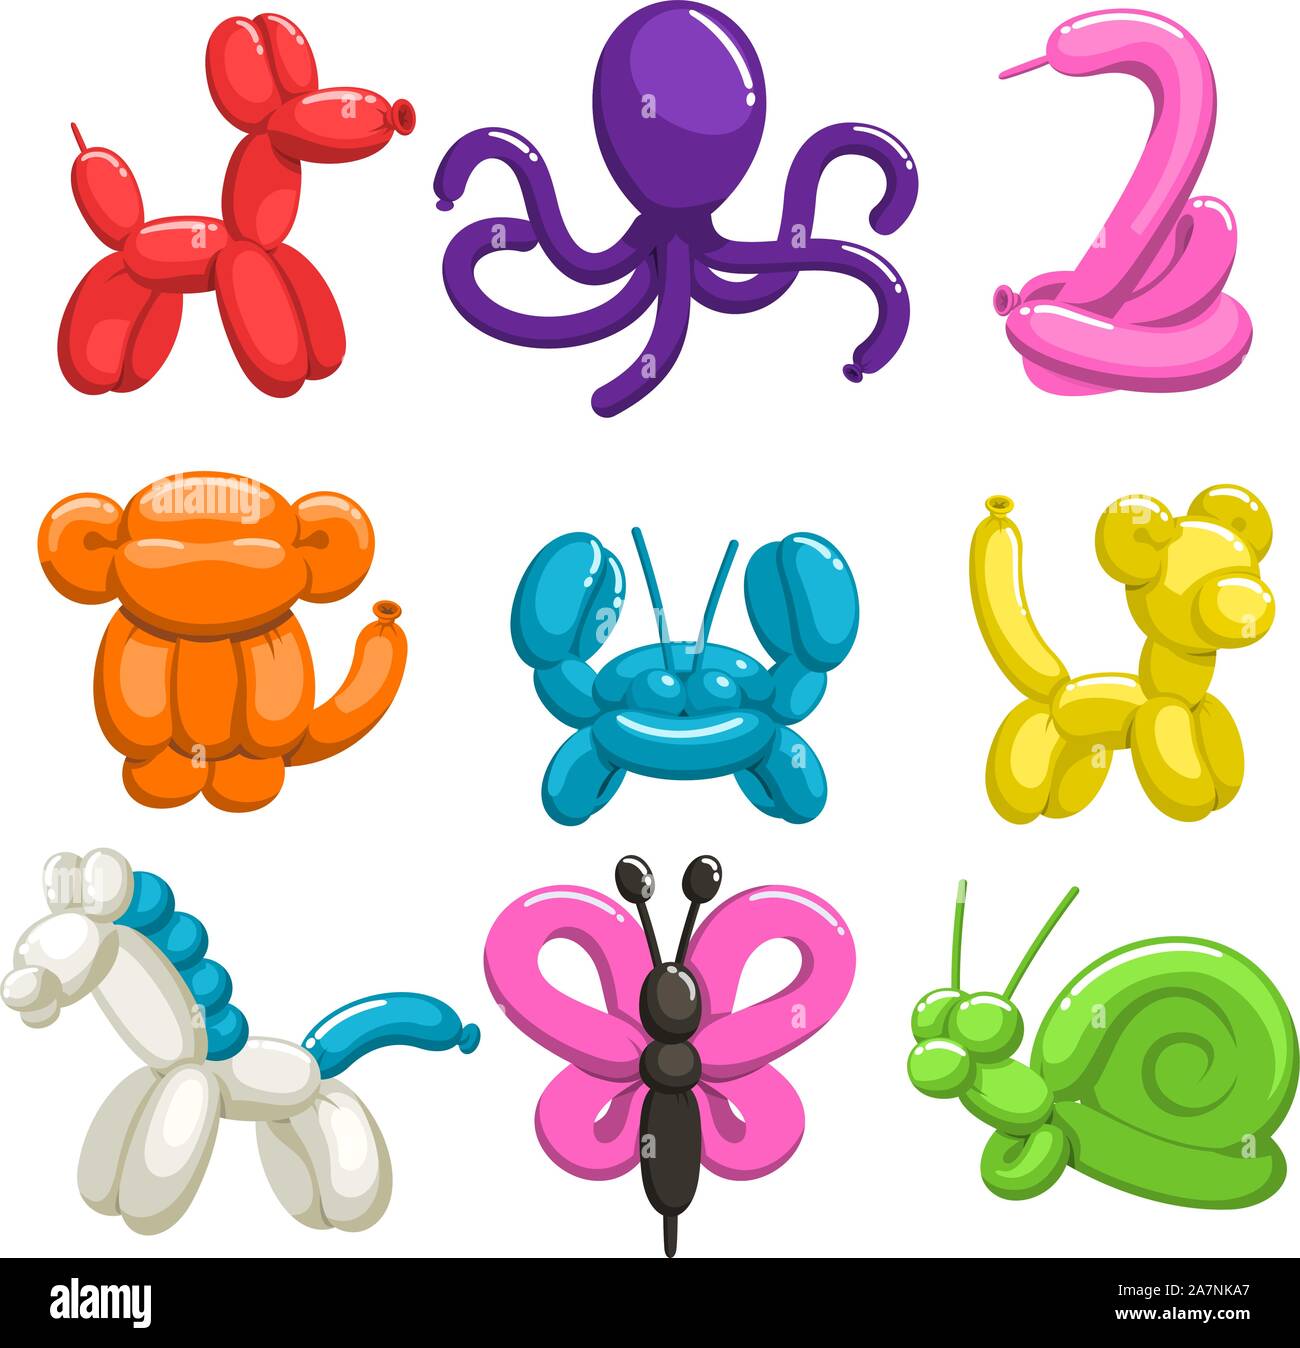 Ballon Animal Set, with dog, octopus, monkey, crab, horse, pony, butterfly, doggy, cat, kittle, snail, marble crab. Vector illustration cartoon. Stock Vector